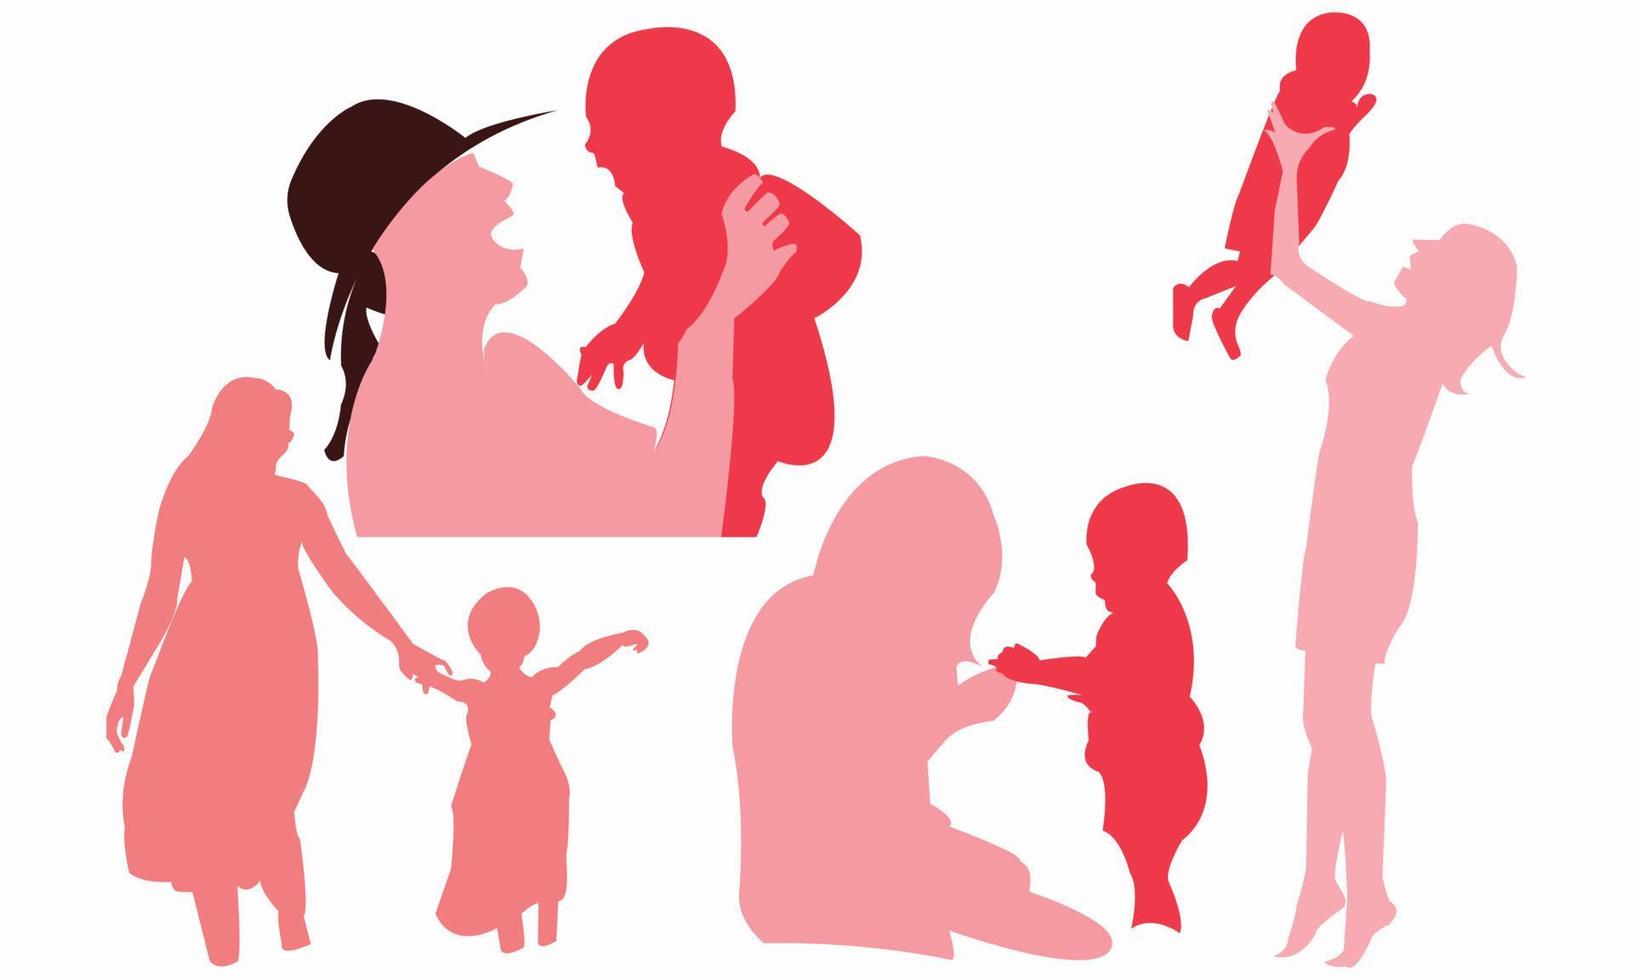 Mother and child vector silhouette illustration design